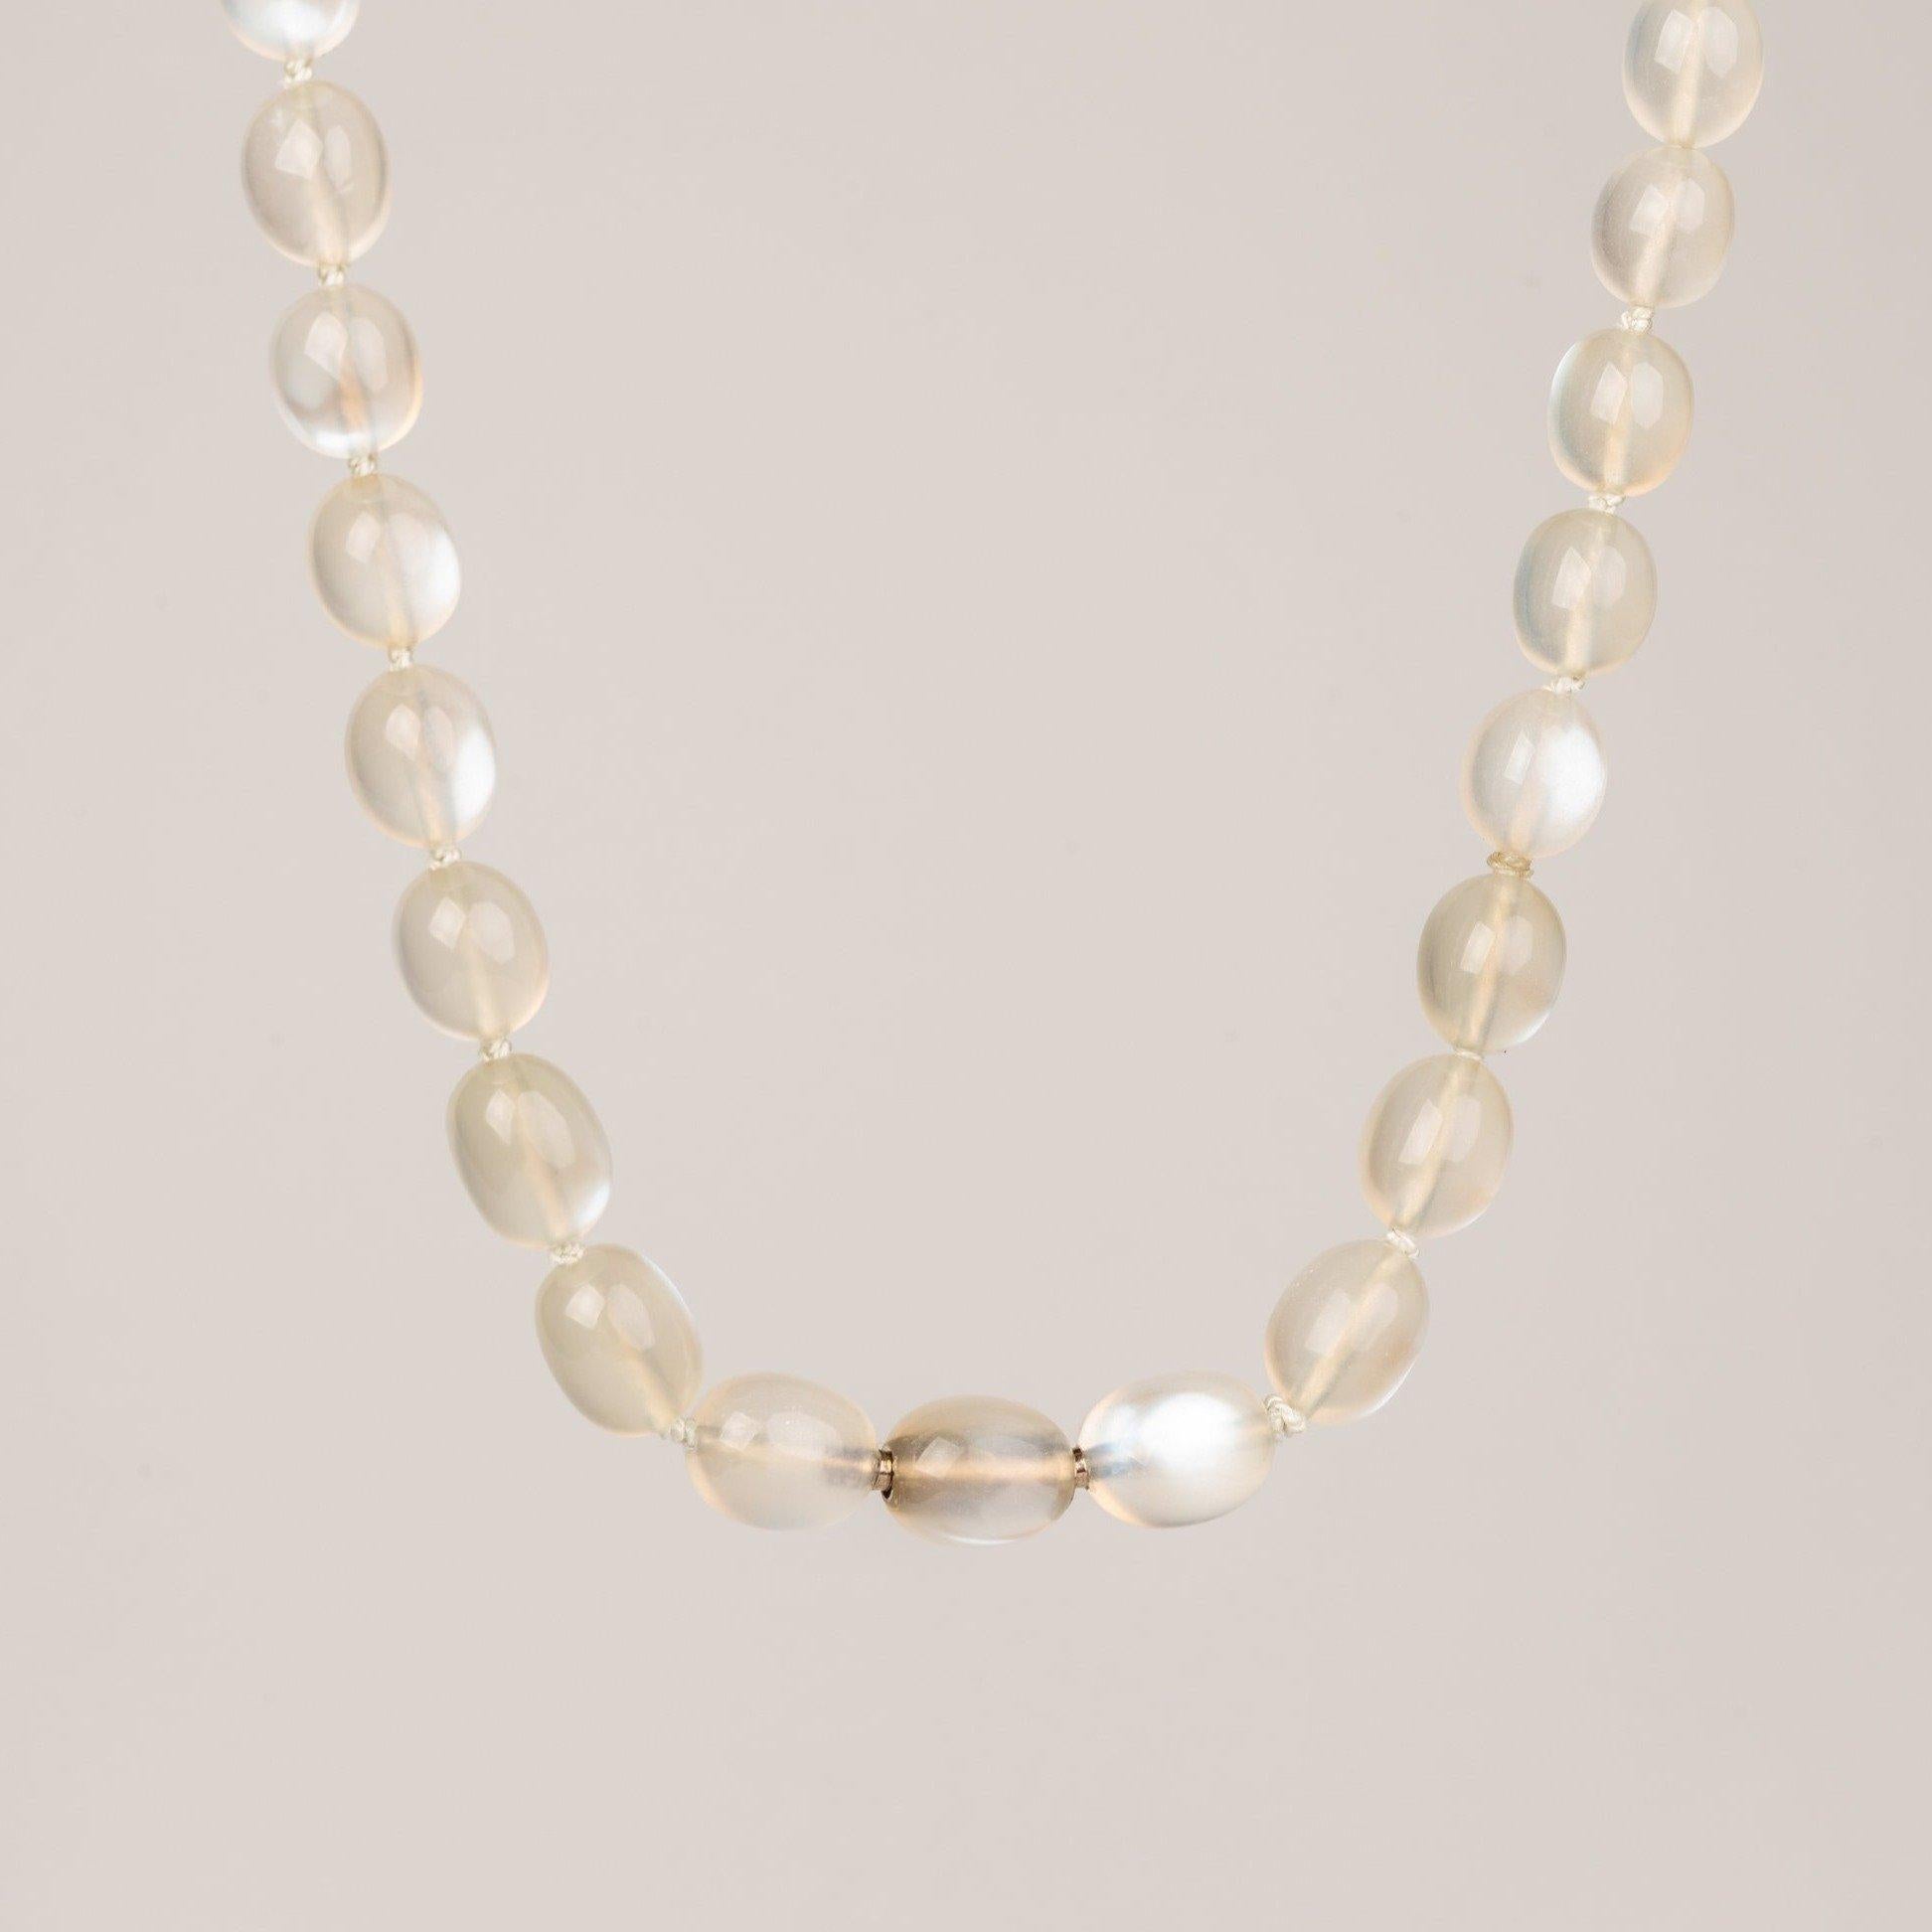 White Lentil Moonstone Necklace with an 18k Yellow Gold Black Opal Clasp For Sale 1